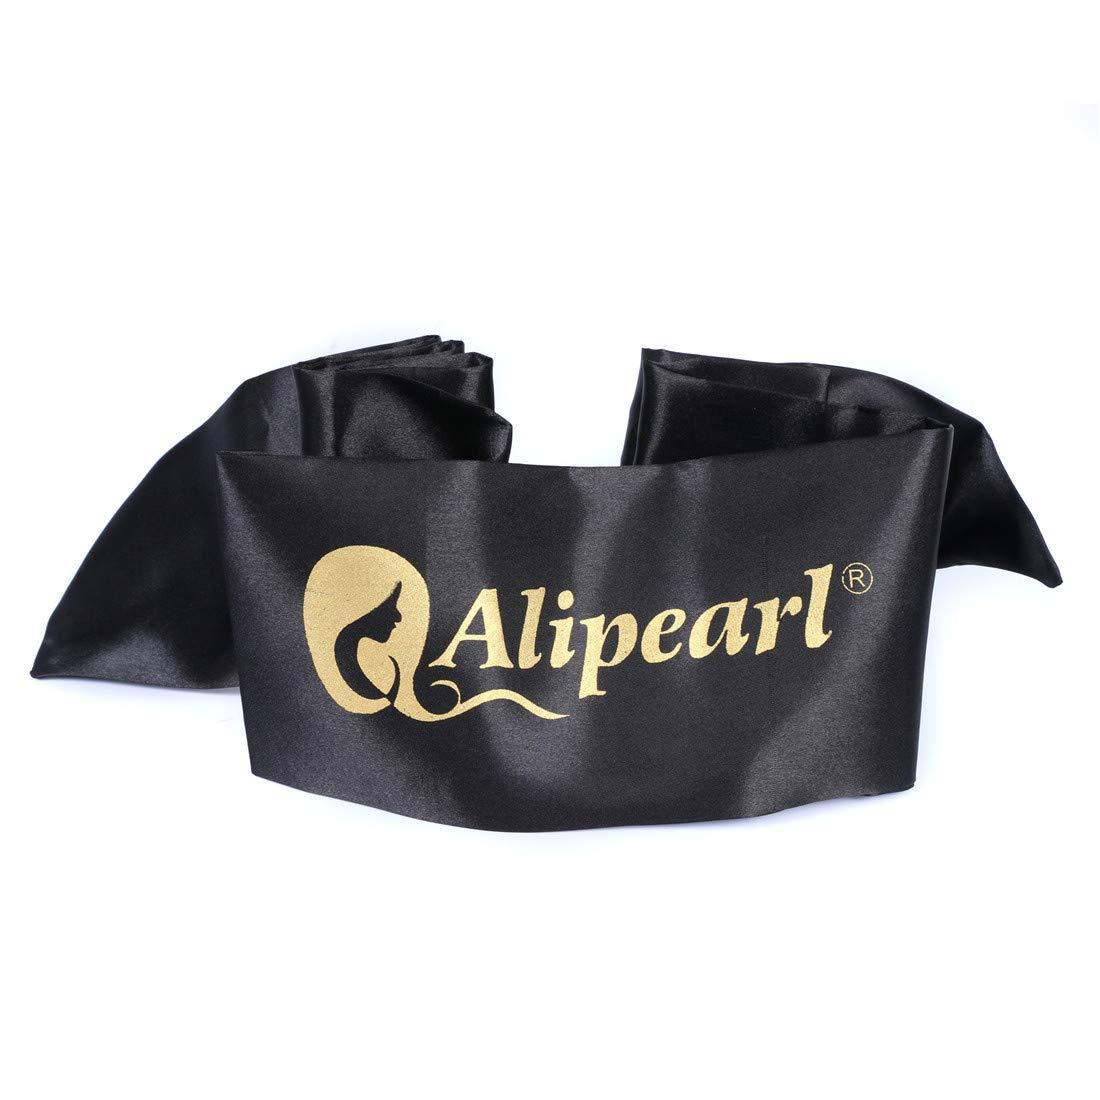 Ali Pearl Edge Wrap for Black Hair-Satin Edge Laying Scarf for